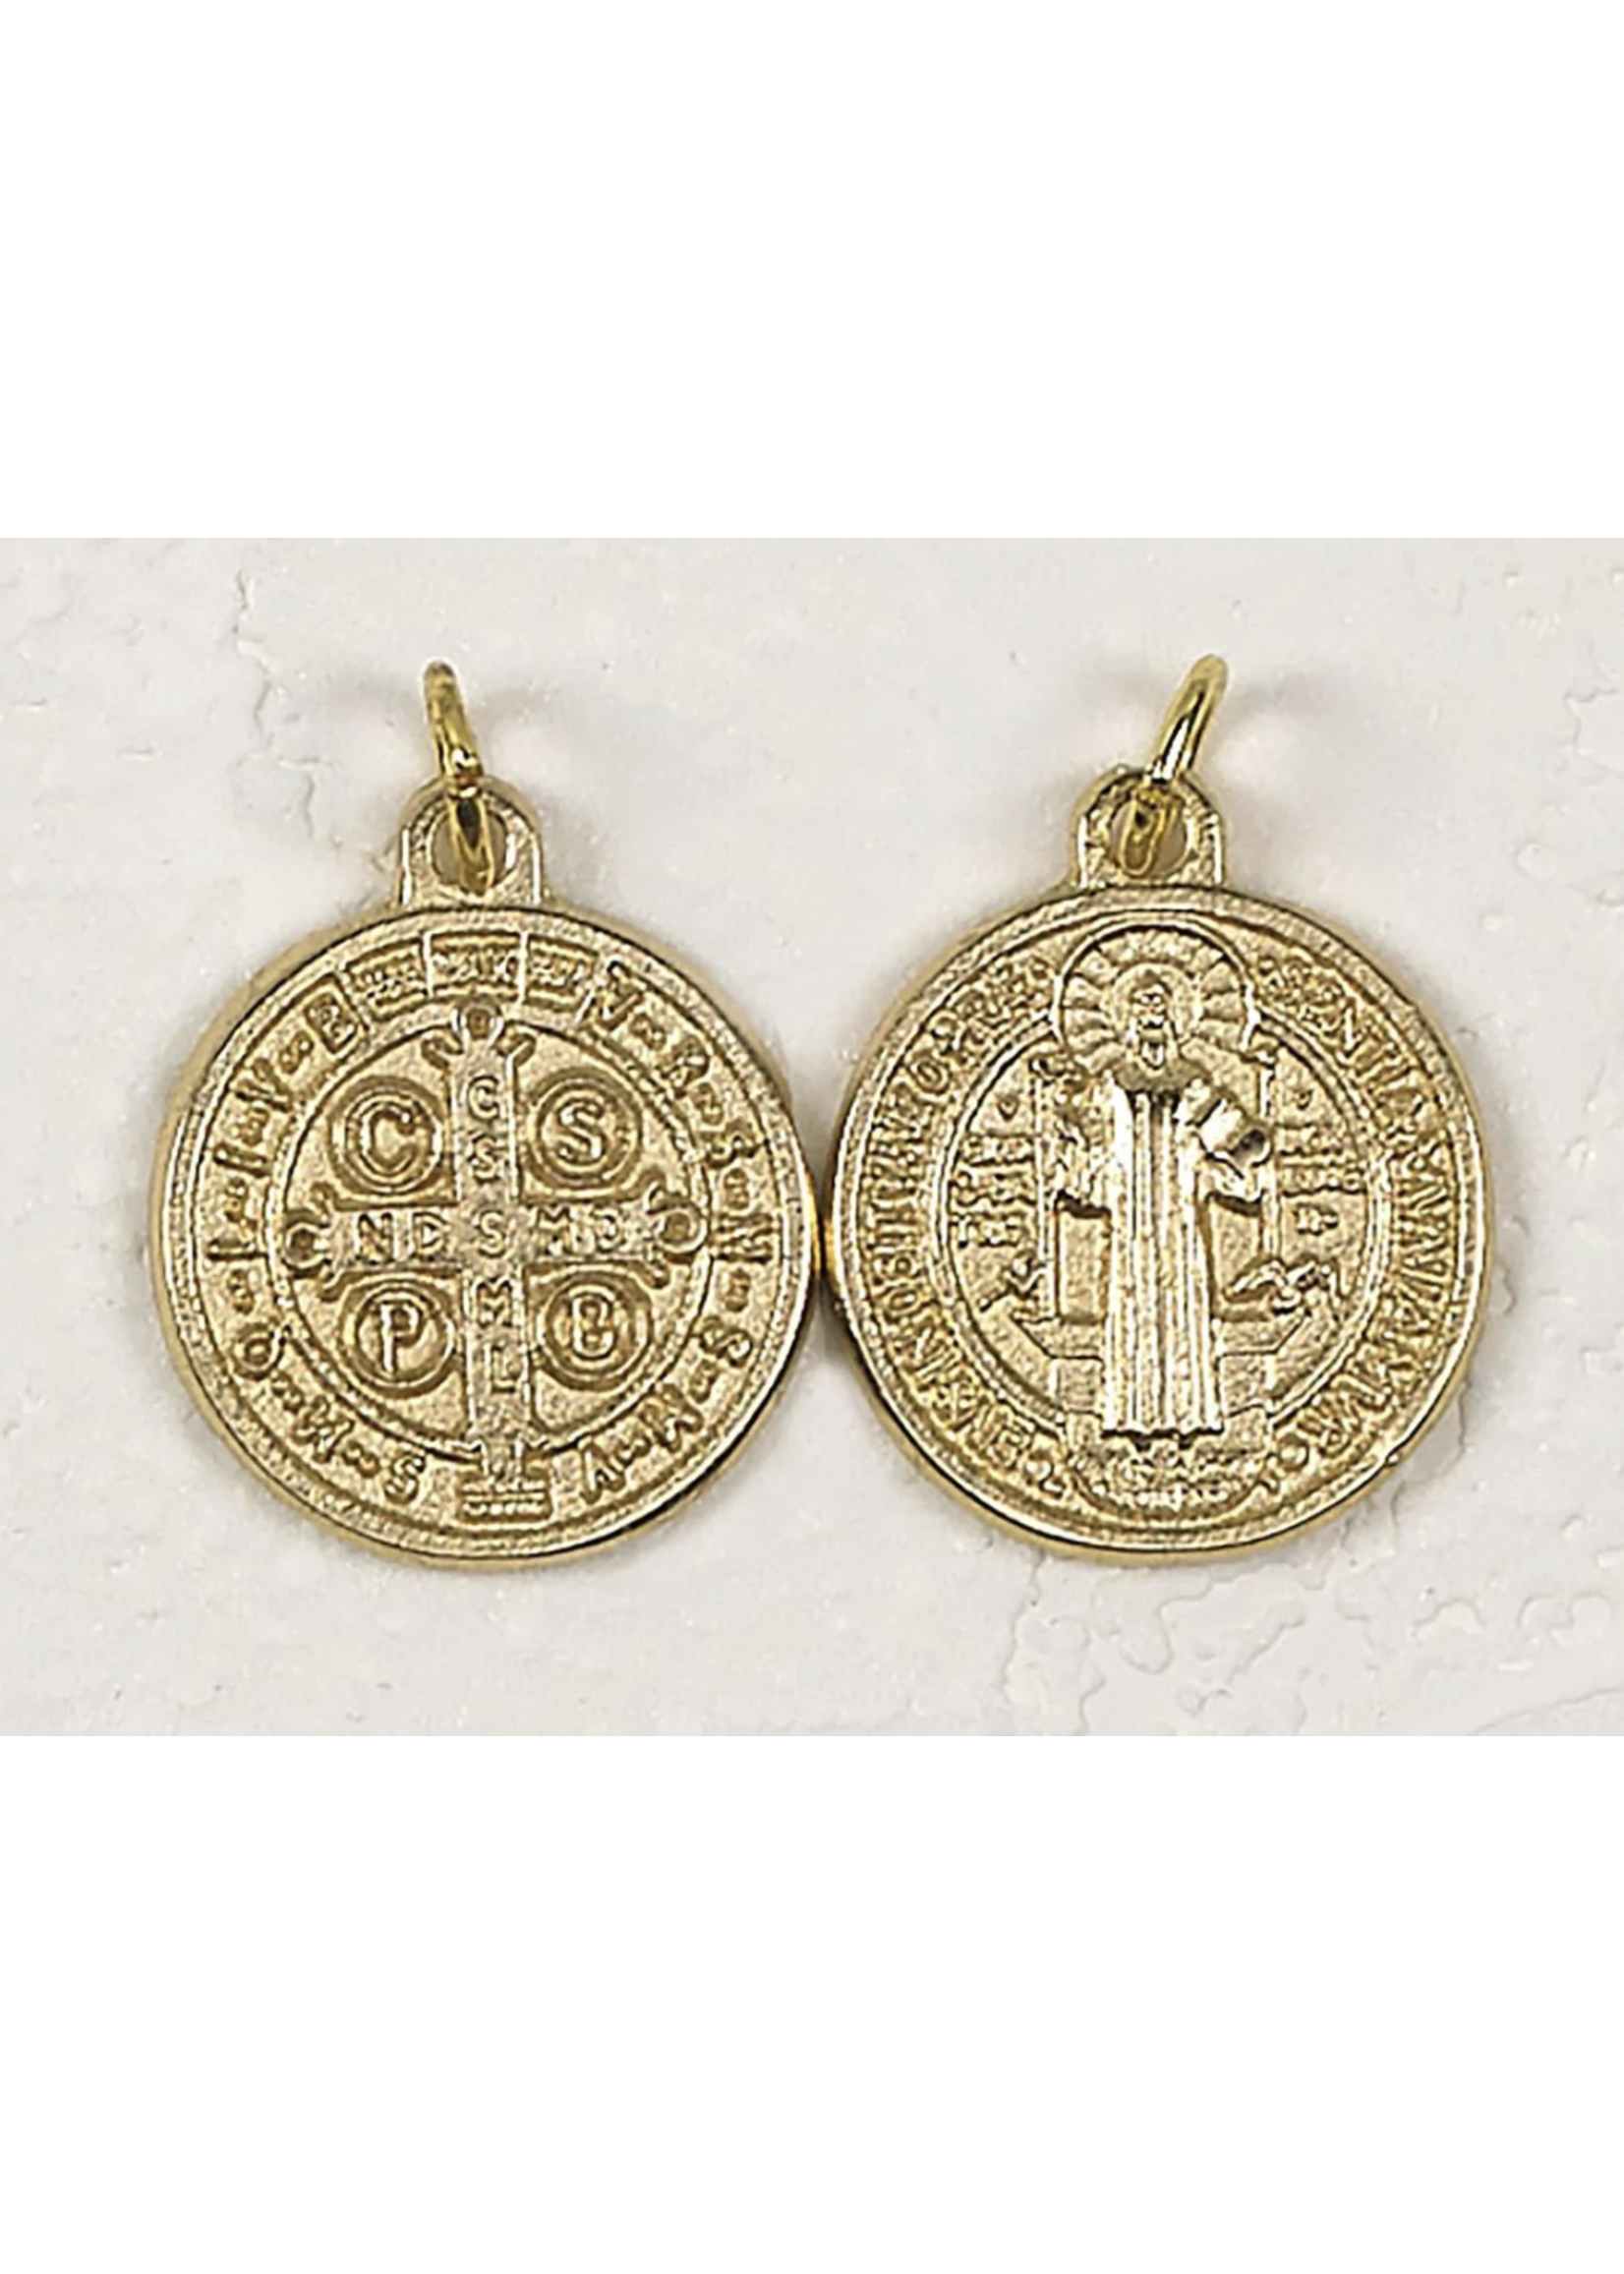 Gold tone Saint Benedict double sided round medal